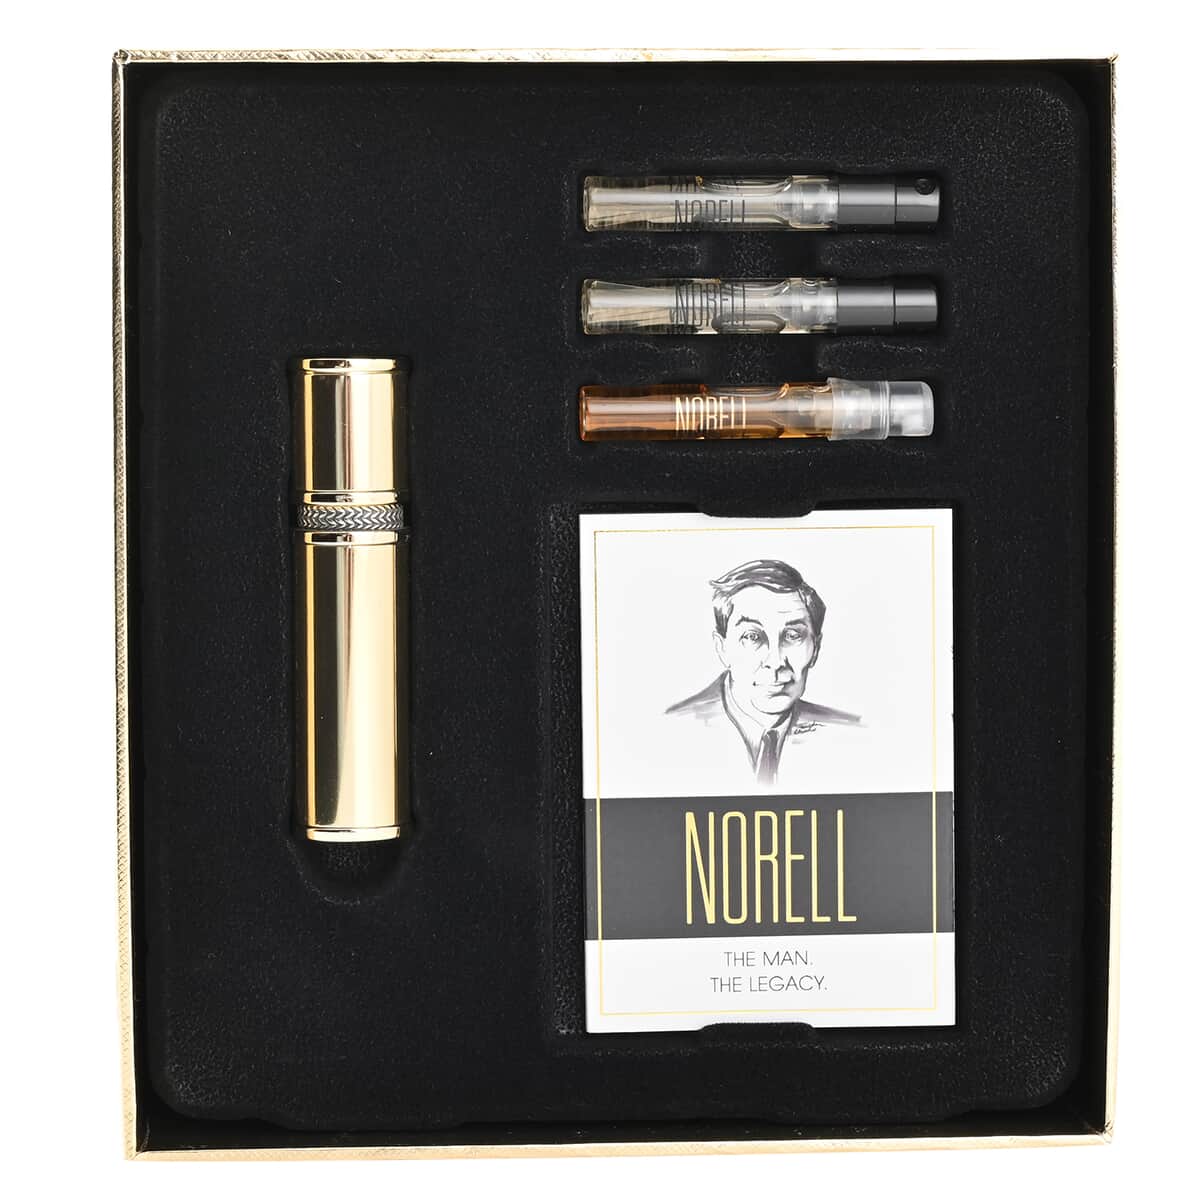 NORELL NY Atomizer 4 Piece Set image number 5